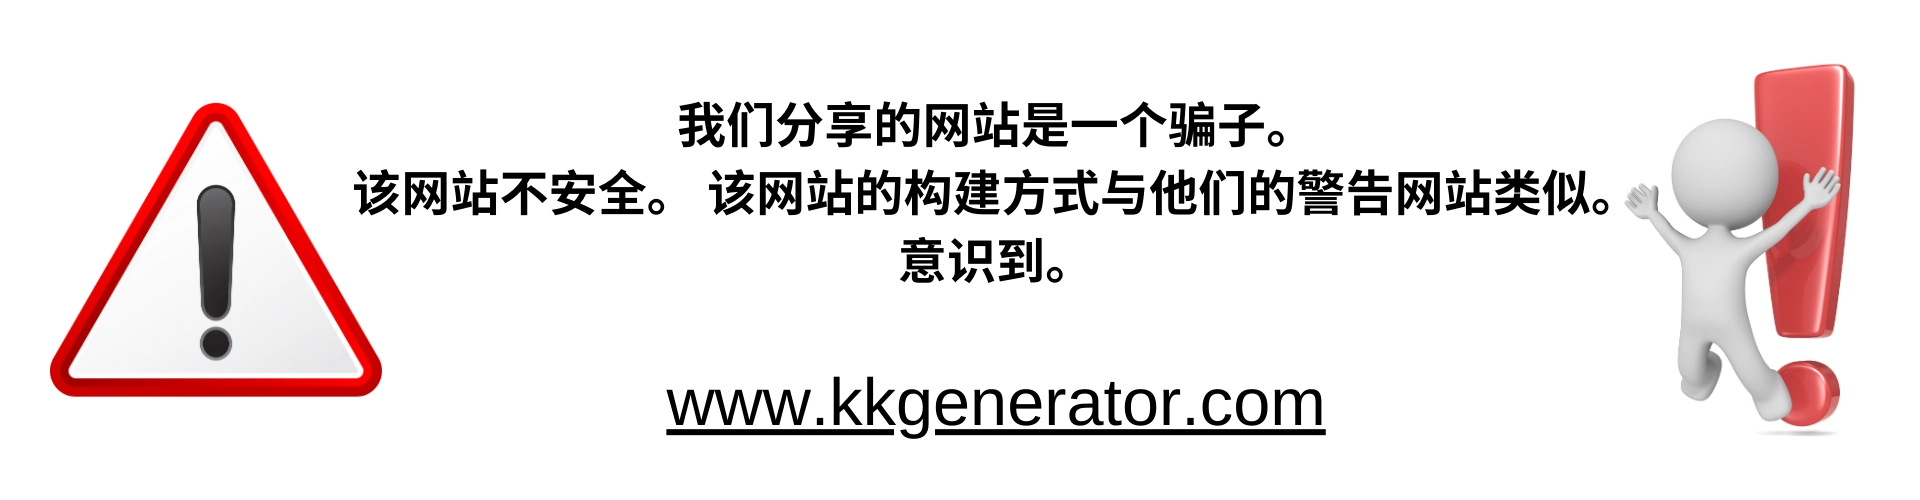 this_is_a_scamer_website_chinese